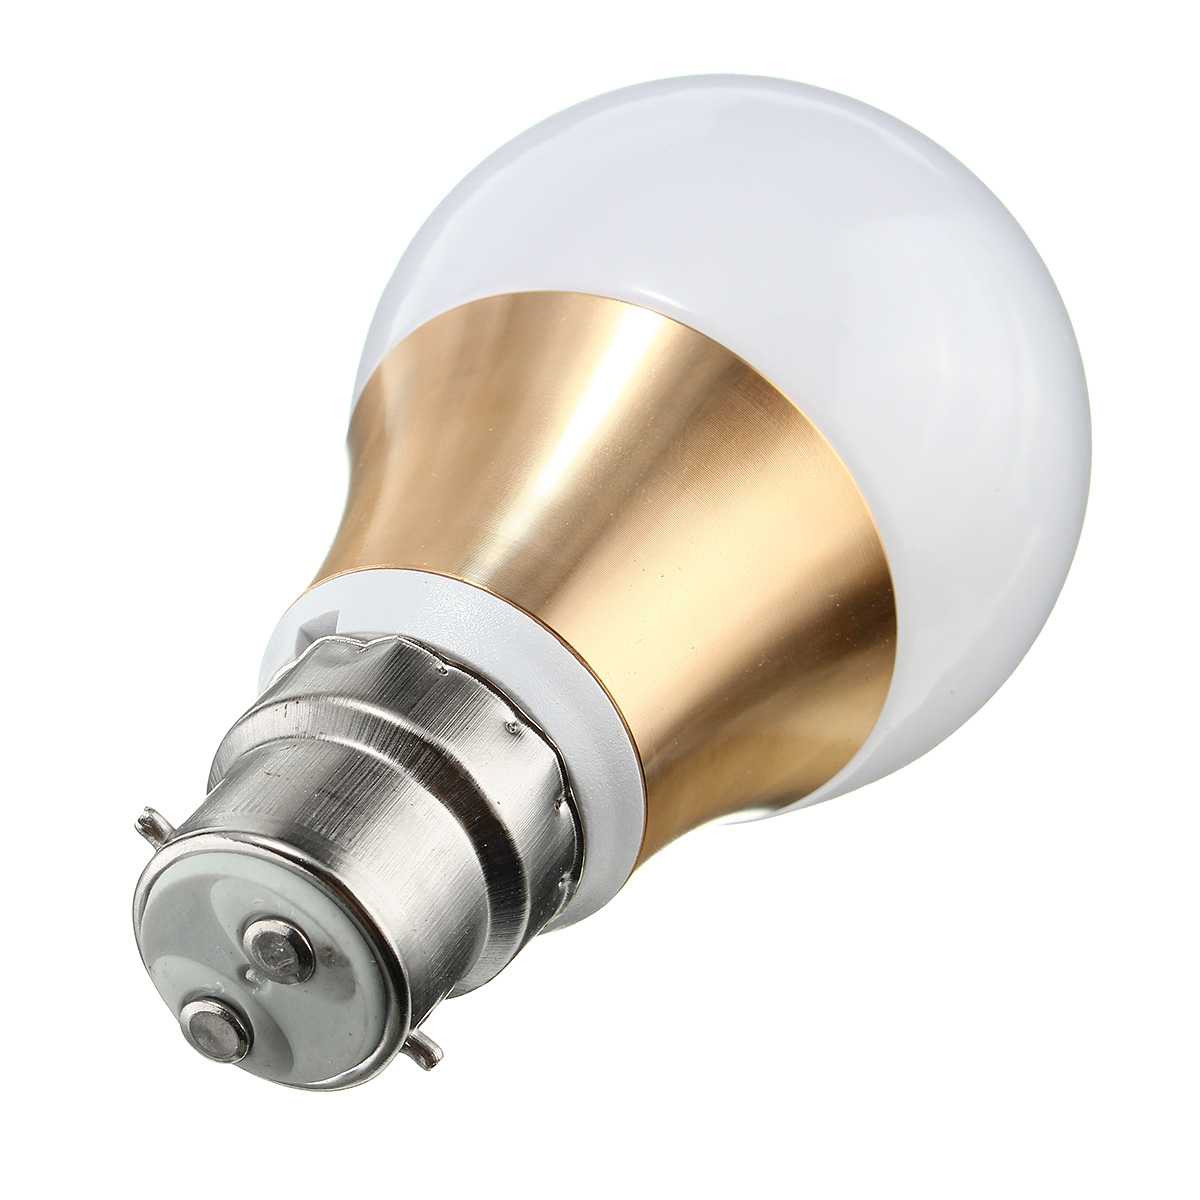 E27-B22-5W-5730-SMD-450LM-LED-Globe-Light-Bulb-Home-Lamp-Decoration-Non-dimmable-AC85-265V-1145768-4